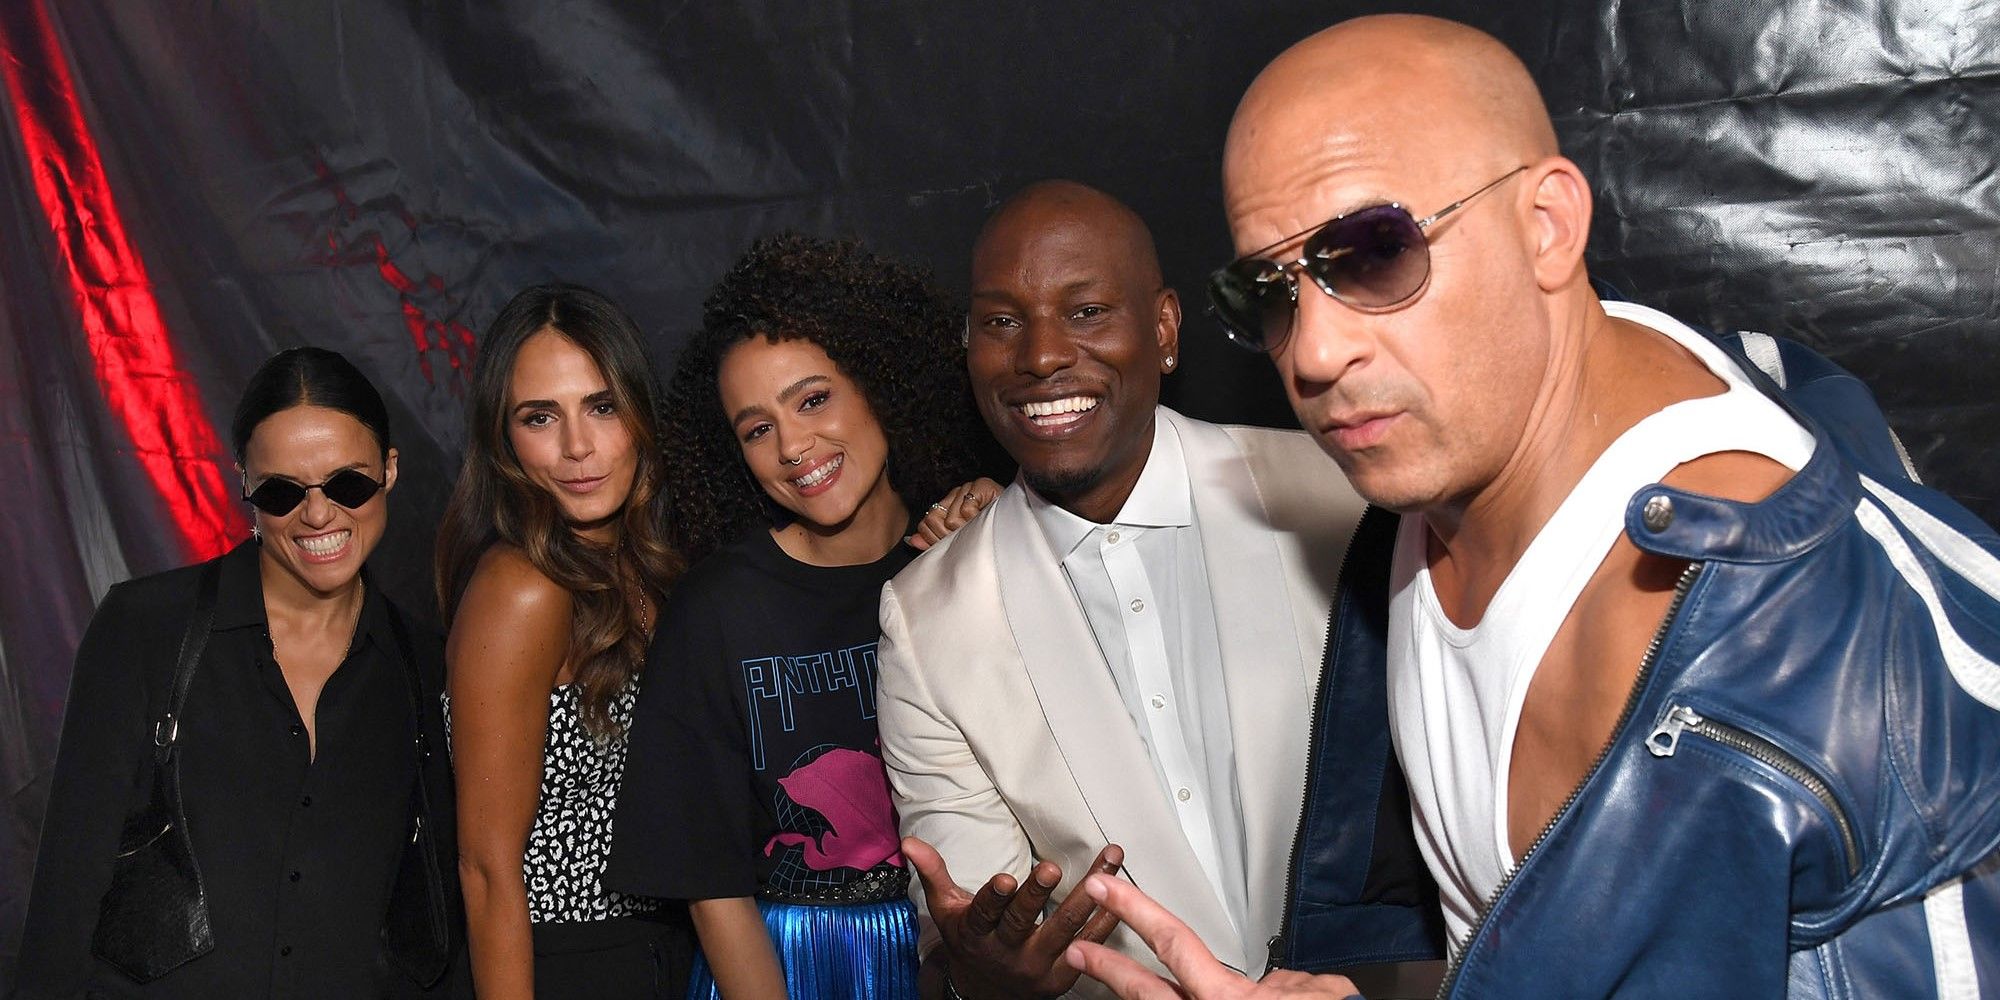 Vin Diesel & The Cast Get Candid About Making The Fast & Furious Films